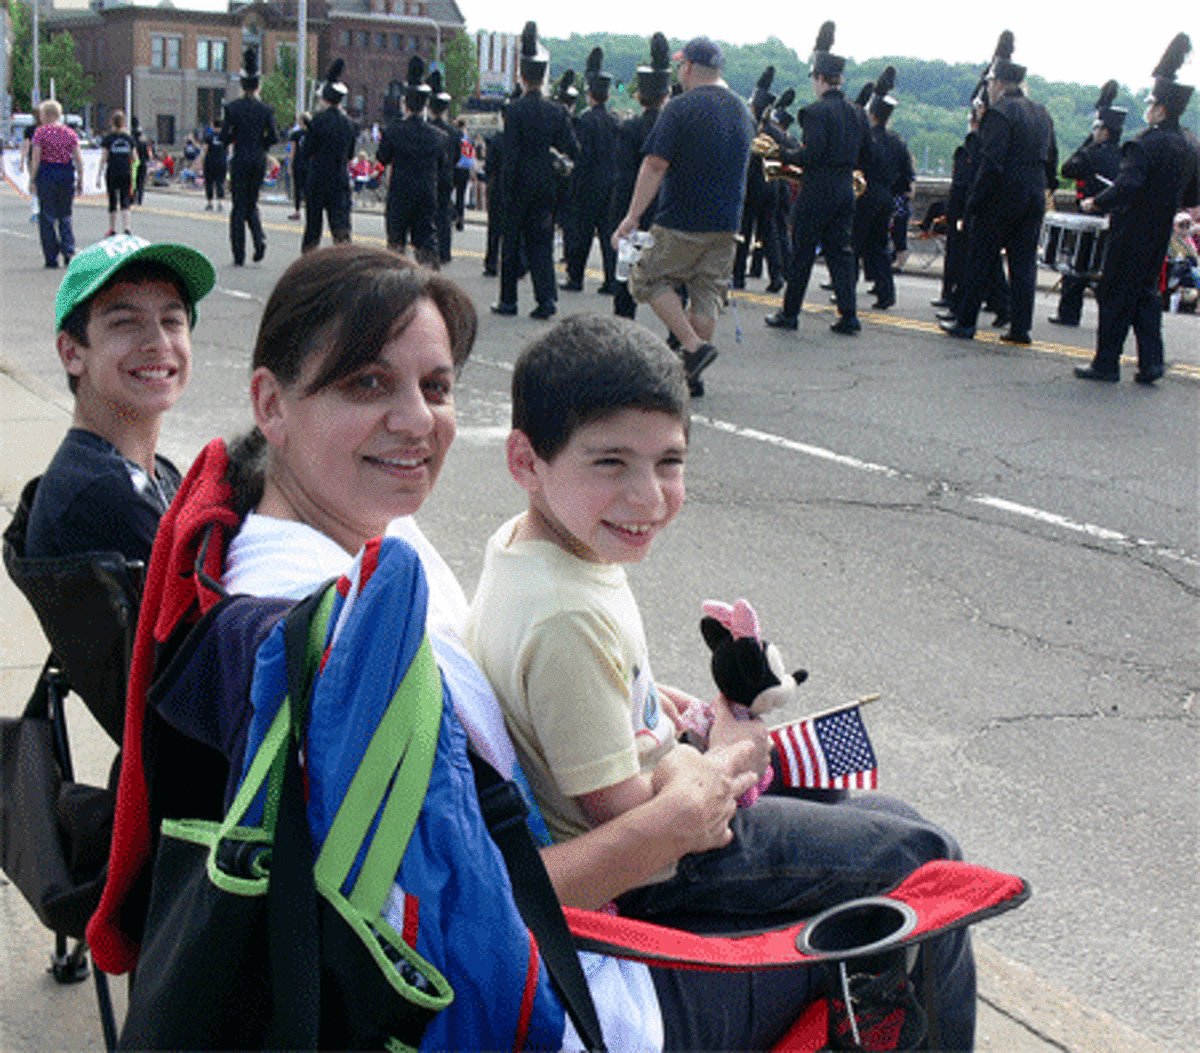 Joanna Ciambriello of Shelton, joined by her sons Michael, 14, left, and Anthony, 7, had a good view of the parade from the bridge.